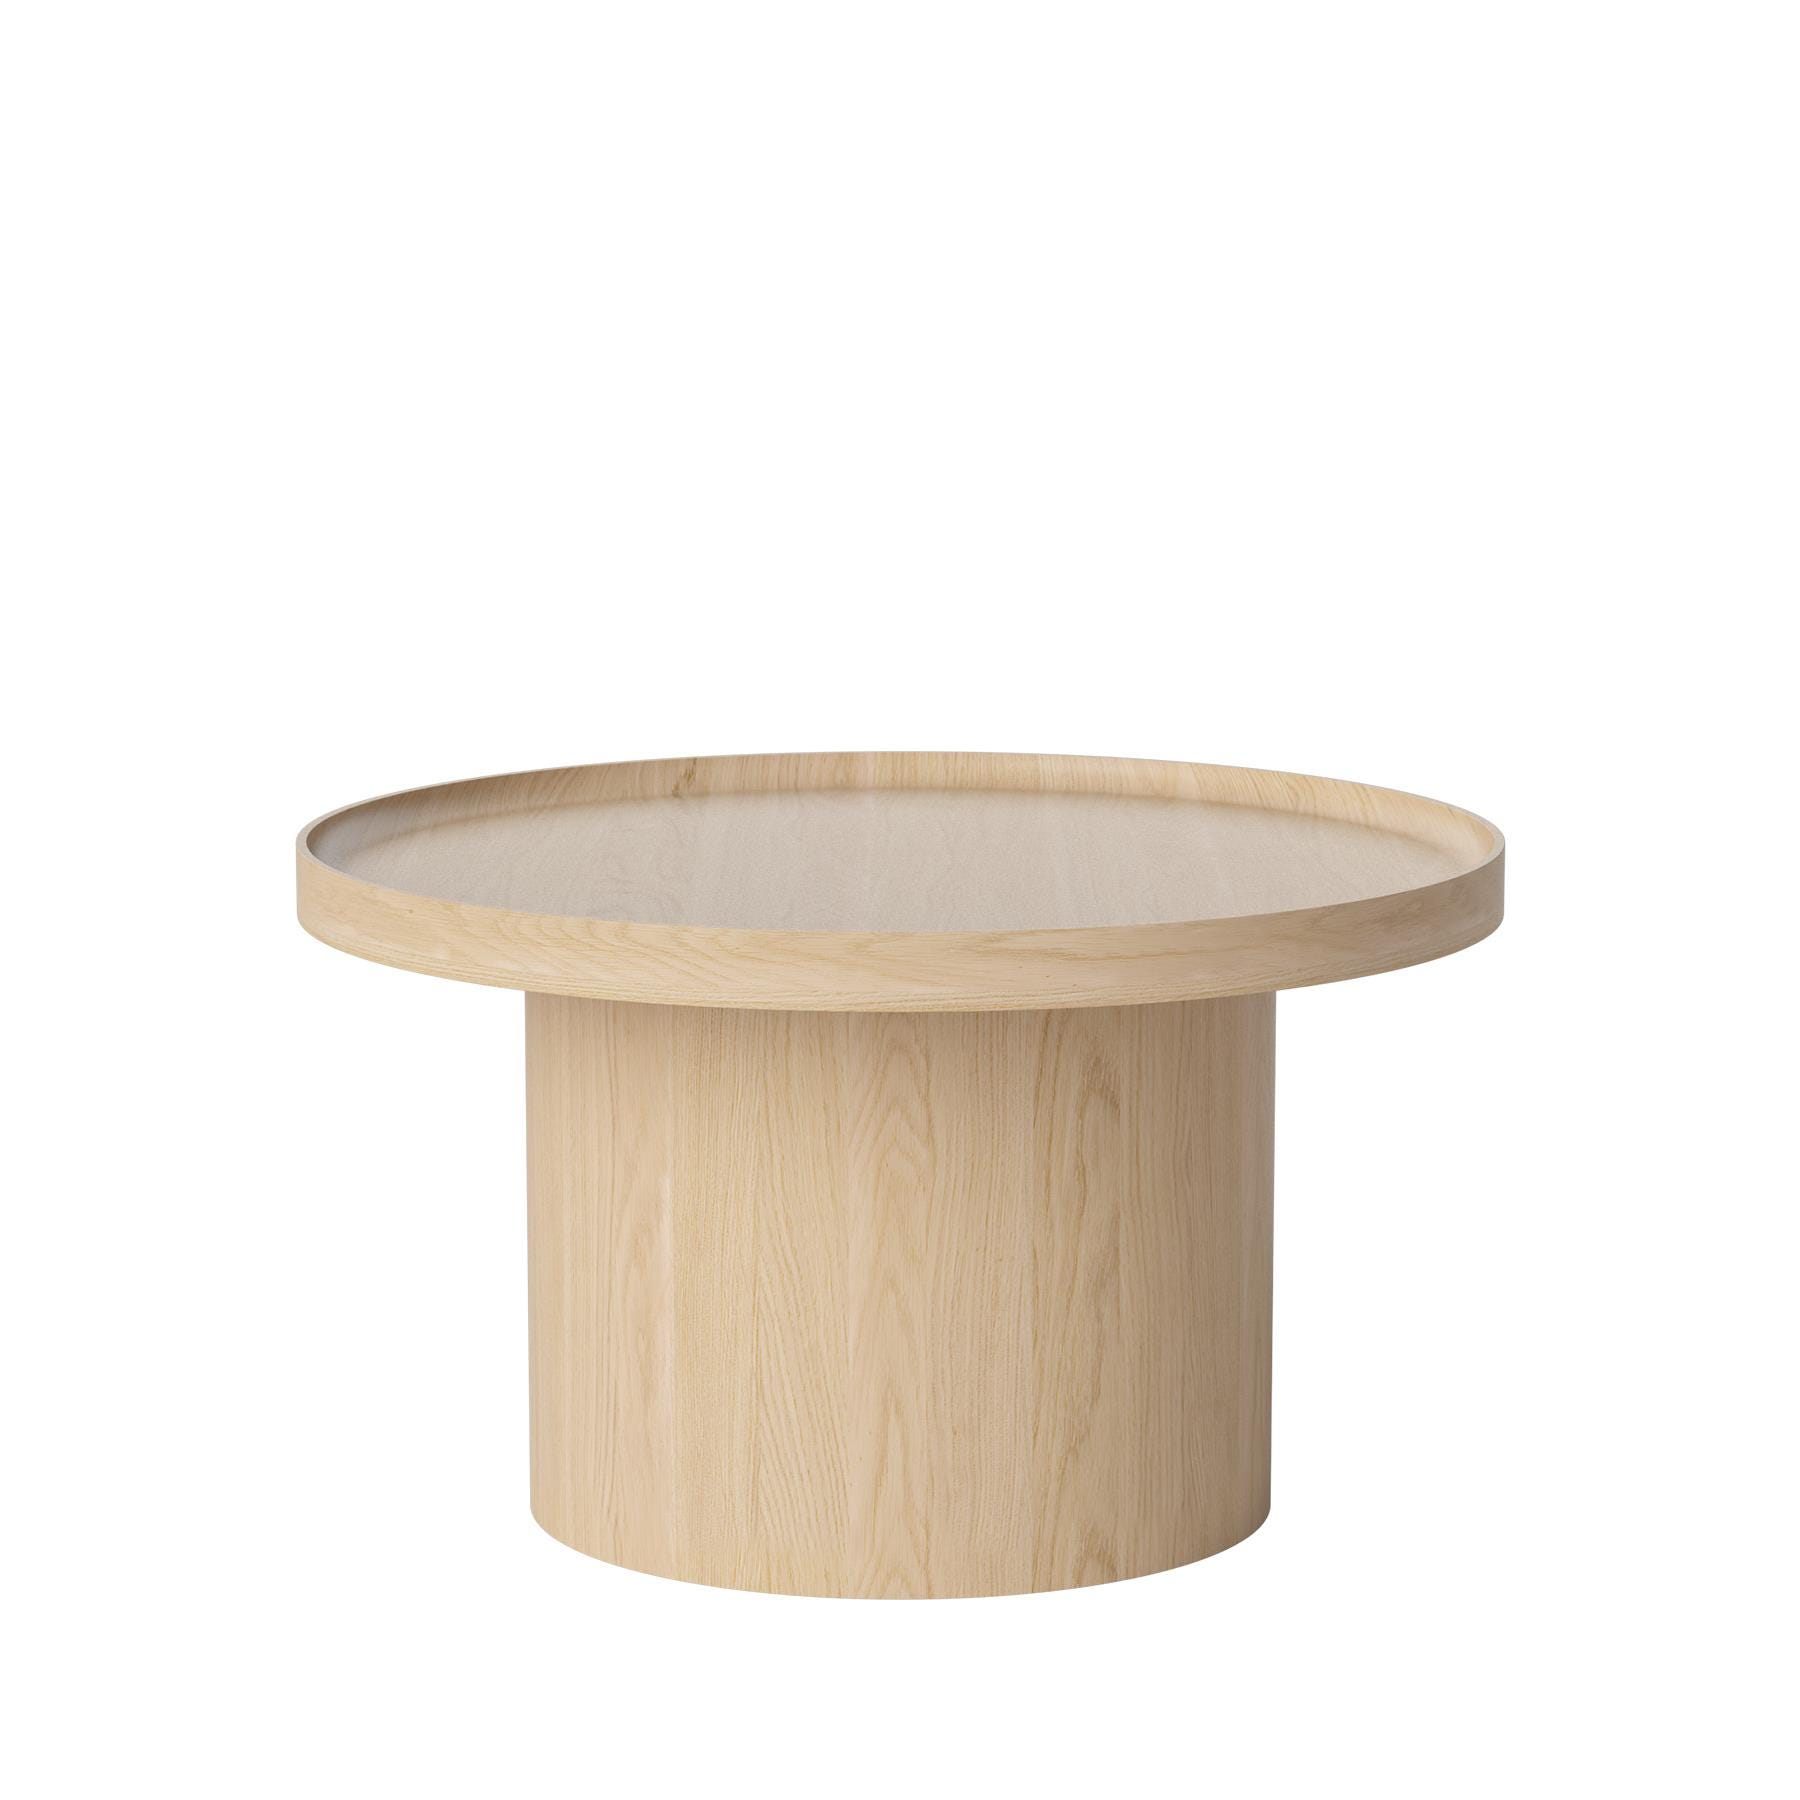 Bolia Plateau Coffee Table Large White Lacquered Oak Light Wood Designer Furniture From Holloways Of Ludlow